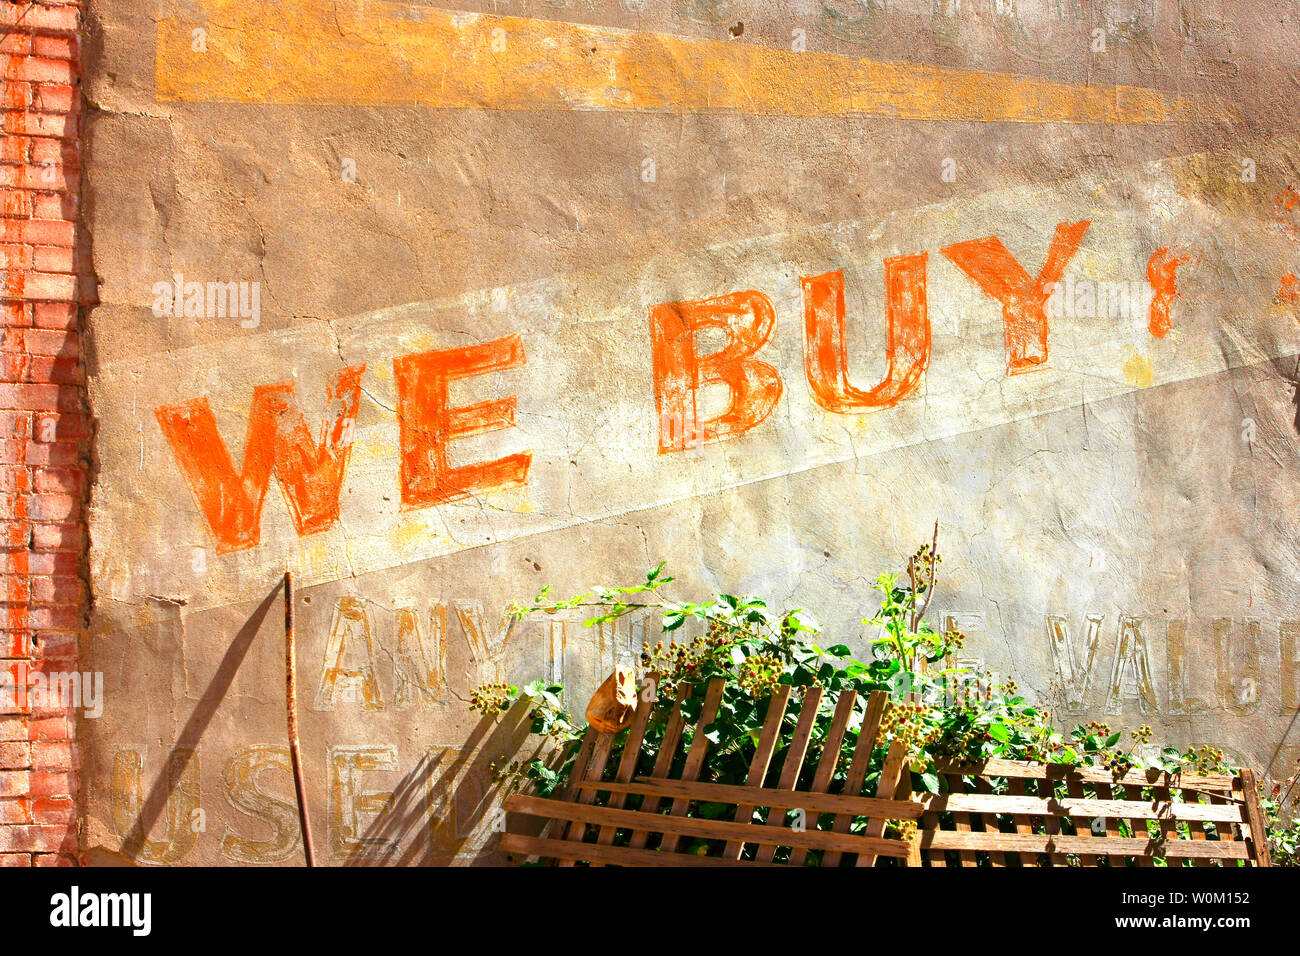 Old paintwork painted on a wall saying 'We Buy' in downtown Bisbee, AZ Stock Photo